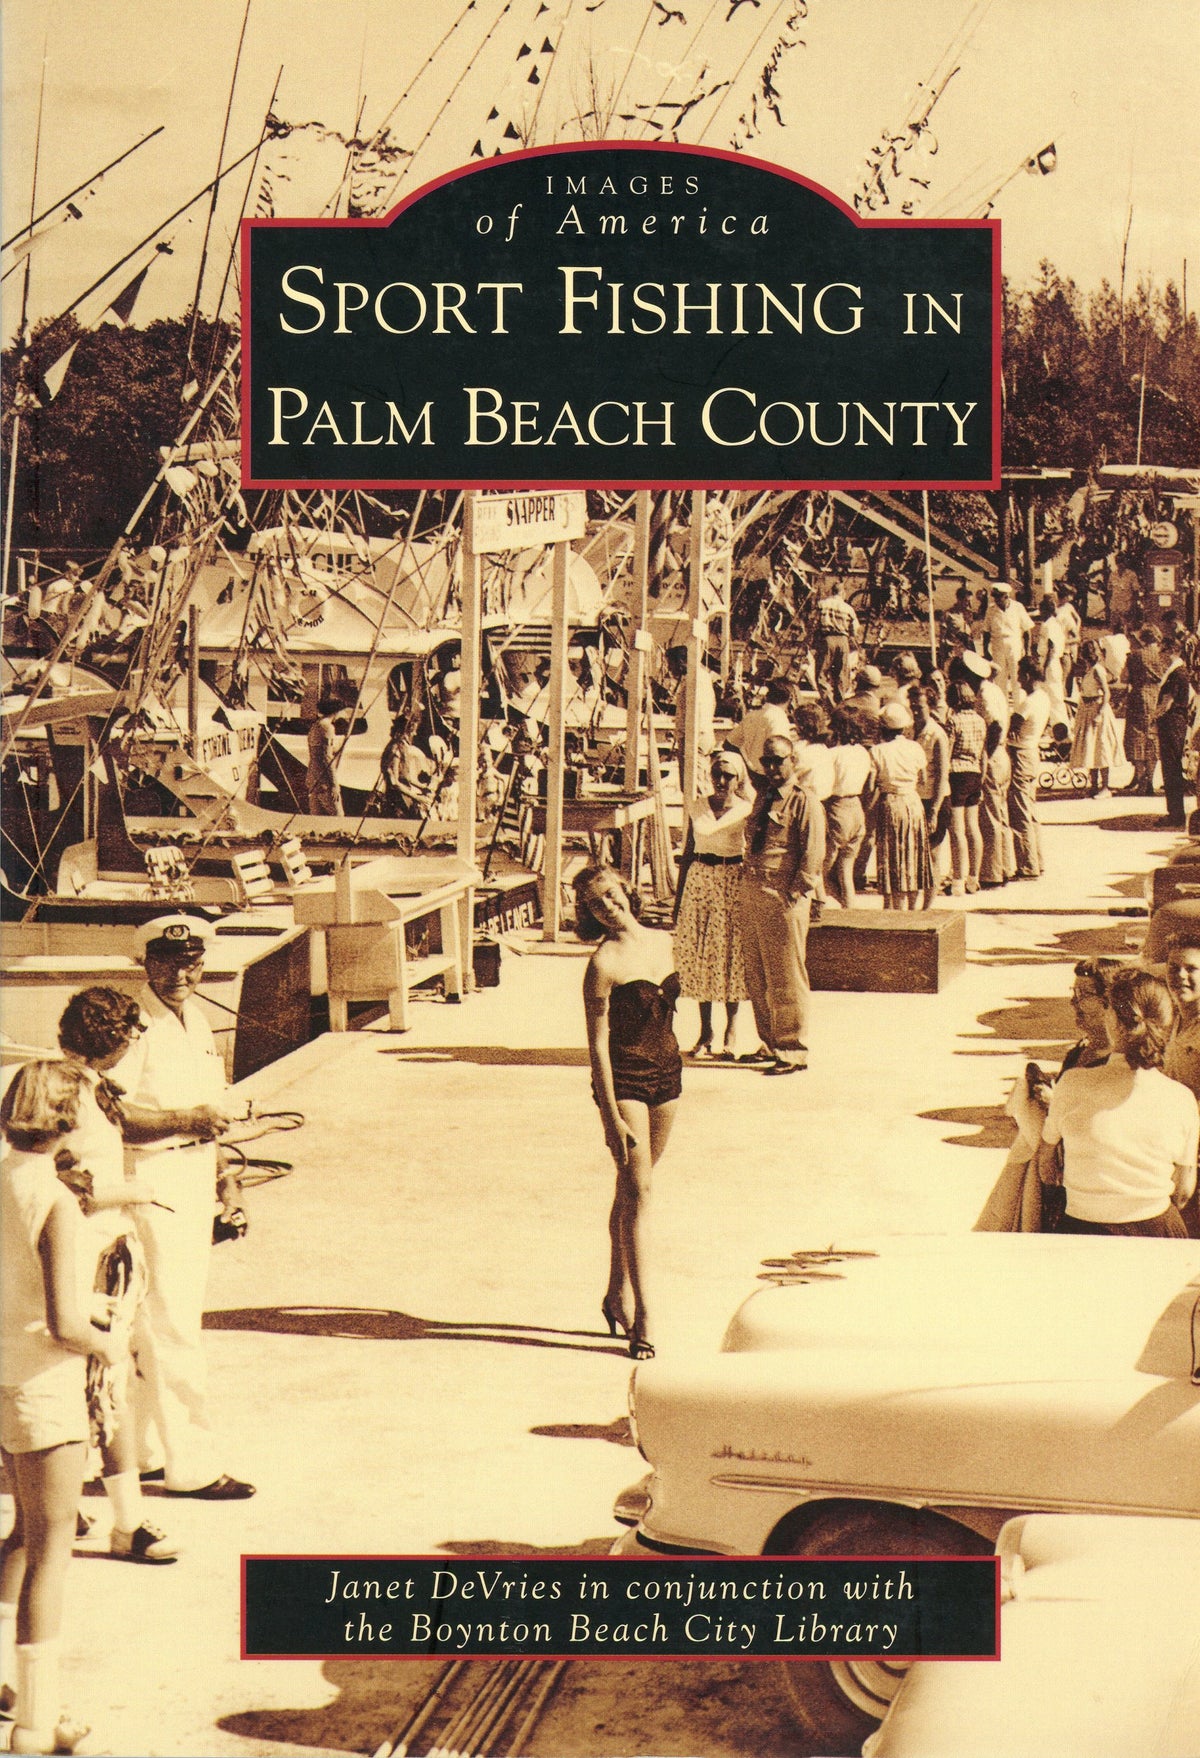 Images of America: Sport Fishing in Palm Beach County